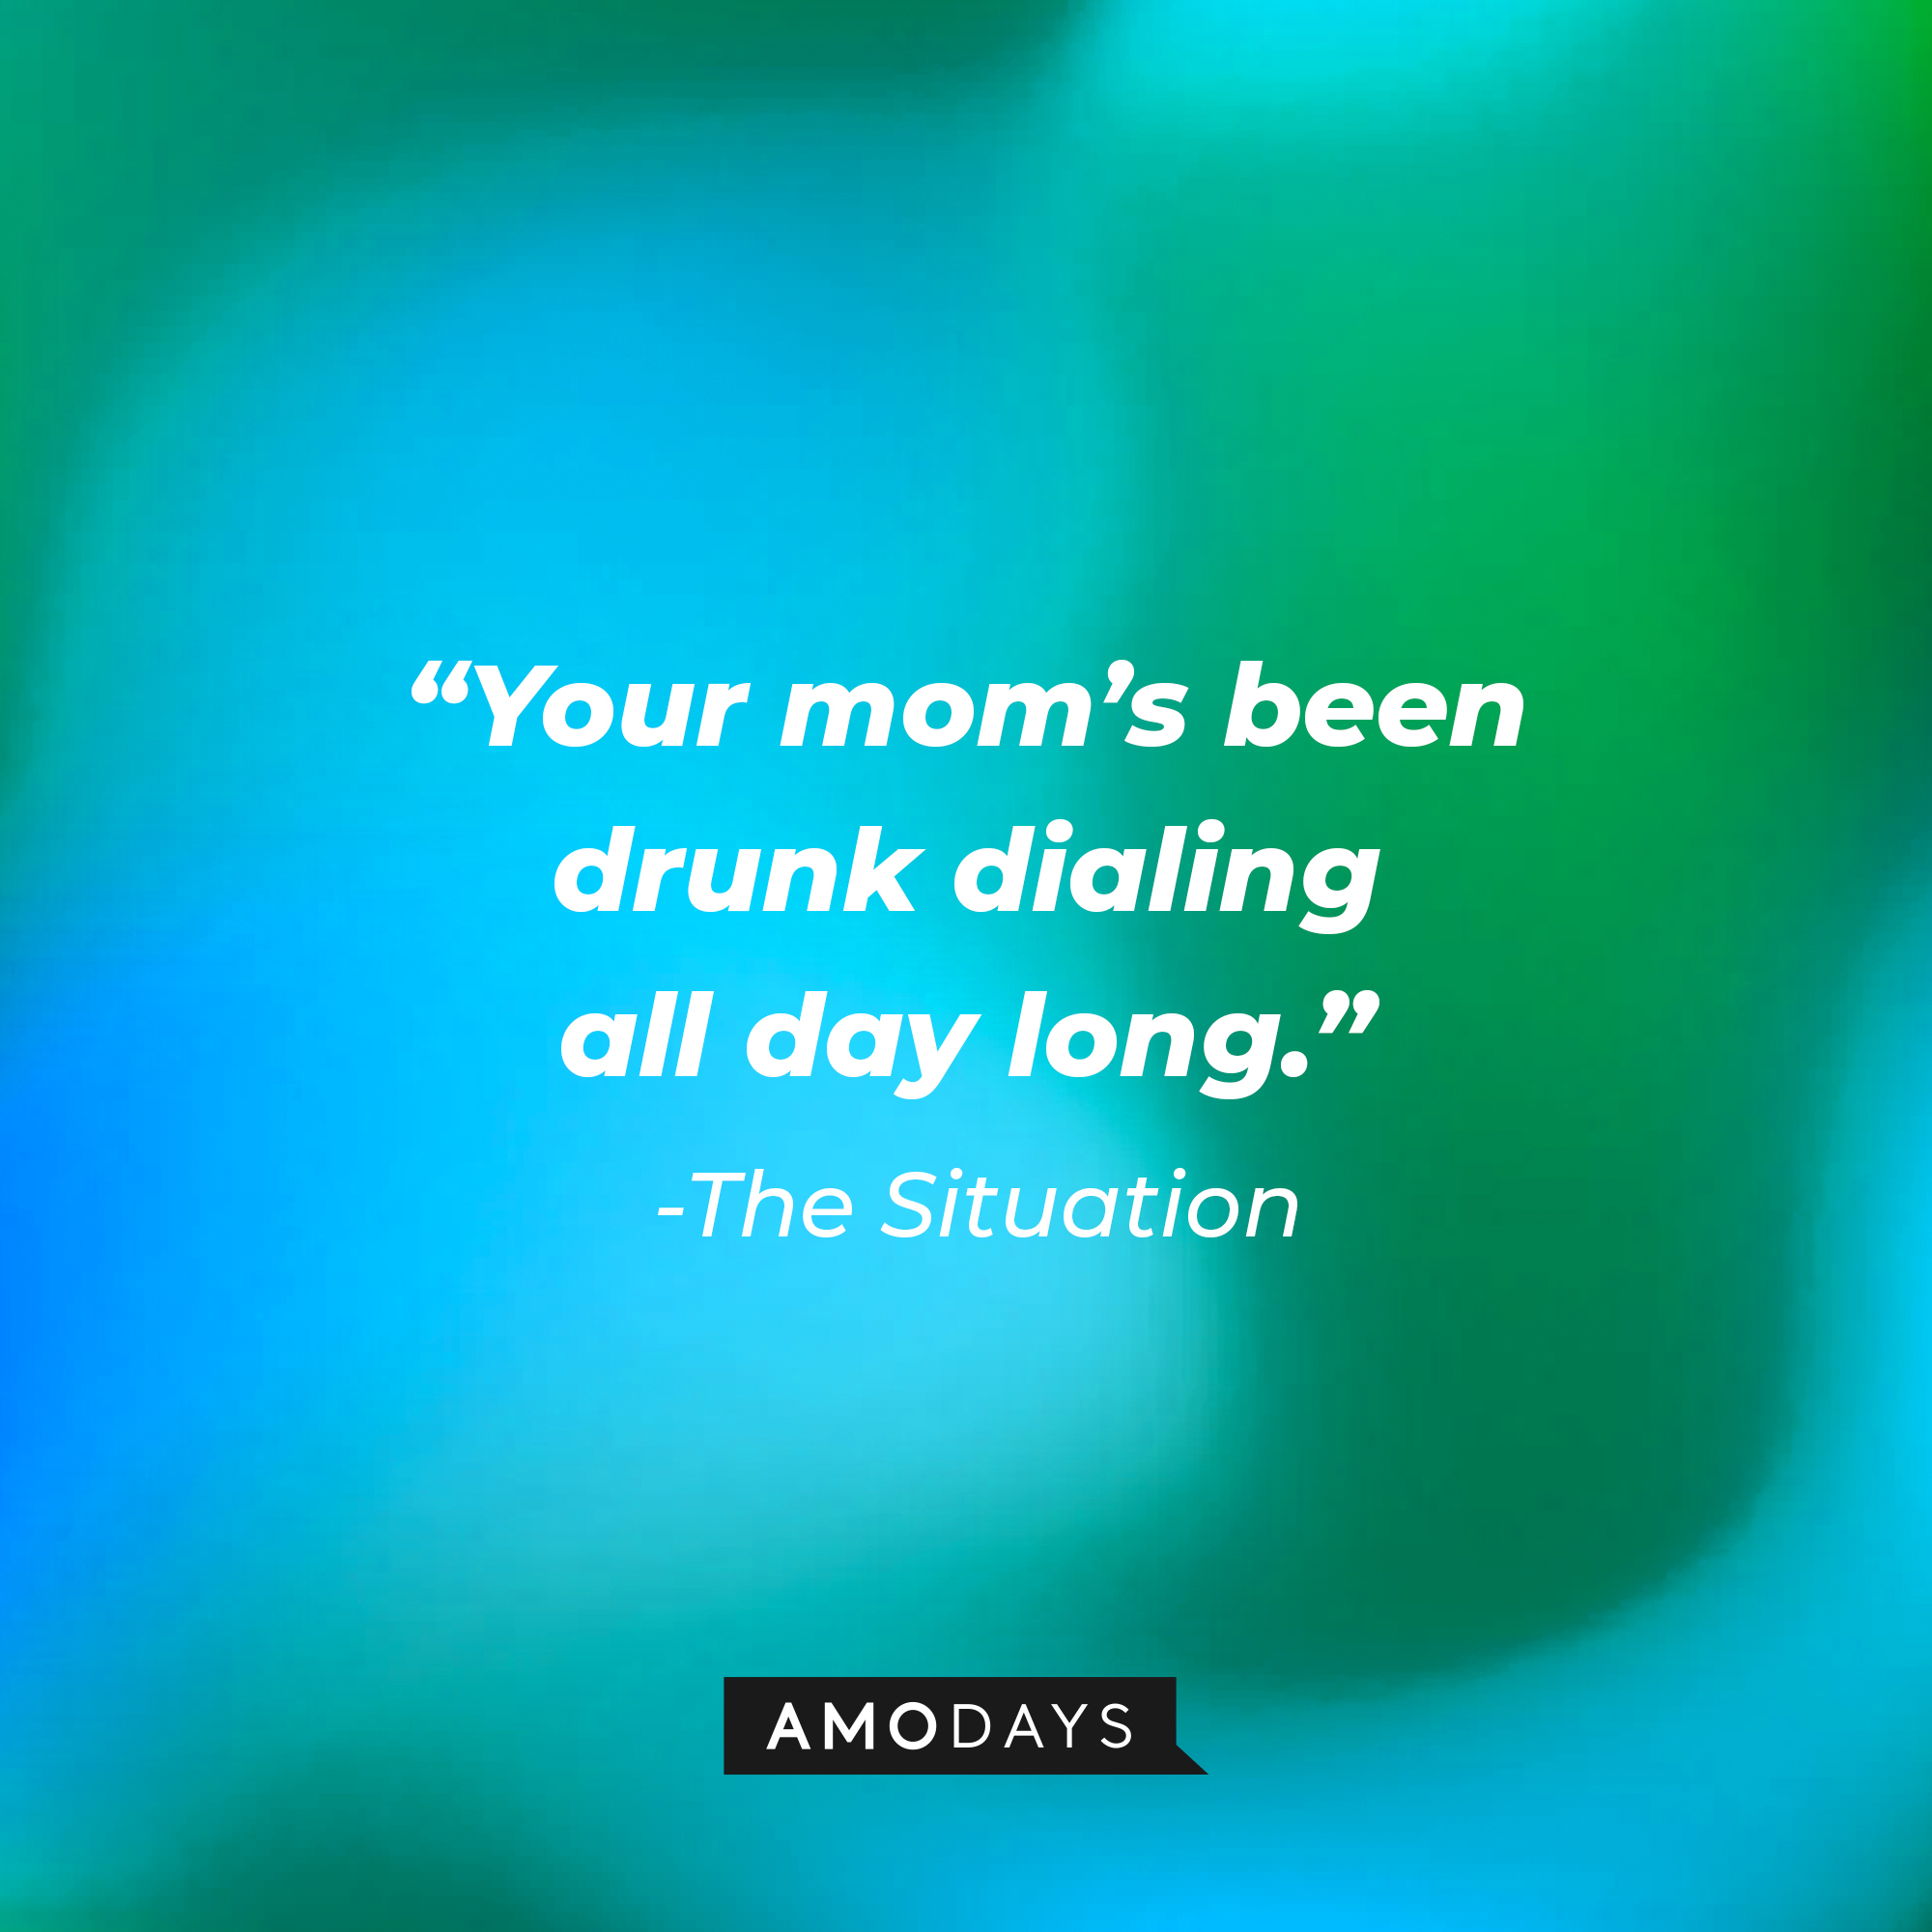 The Situation's quote: "Your mom's been drunk dialing all day long." | Source: youtube.com/jerseyshore